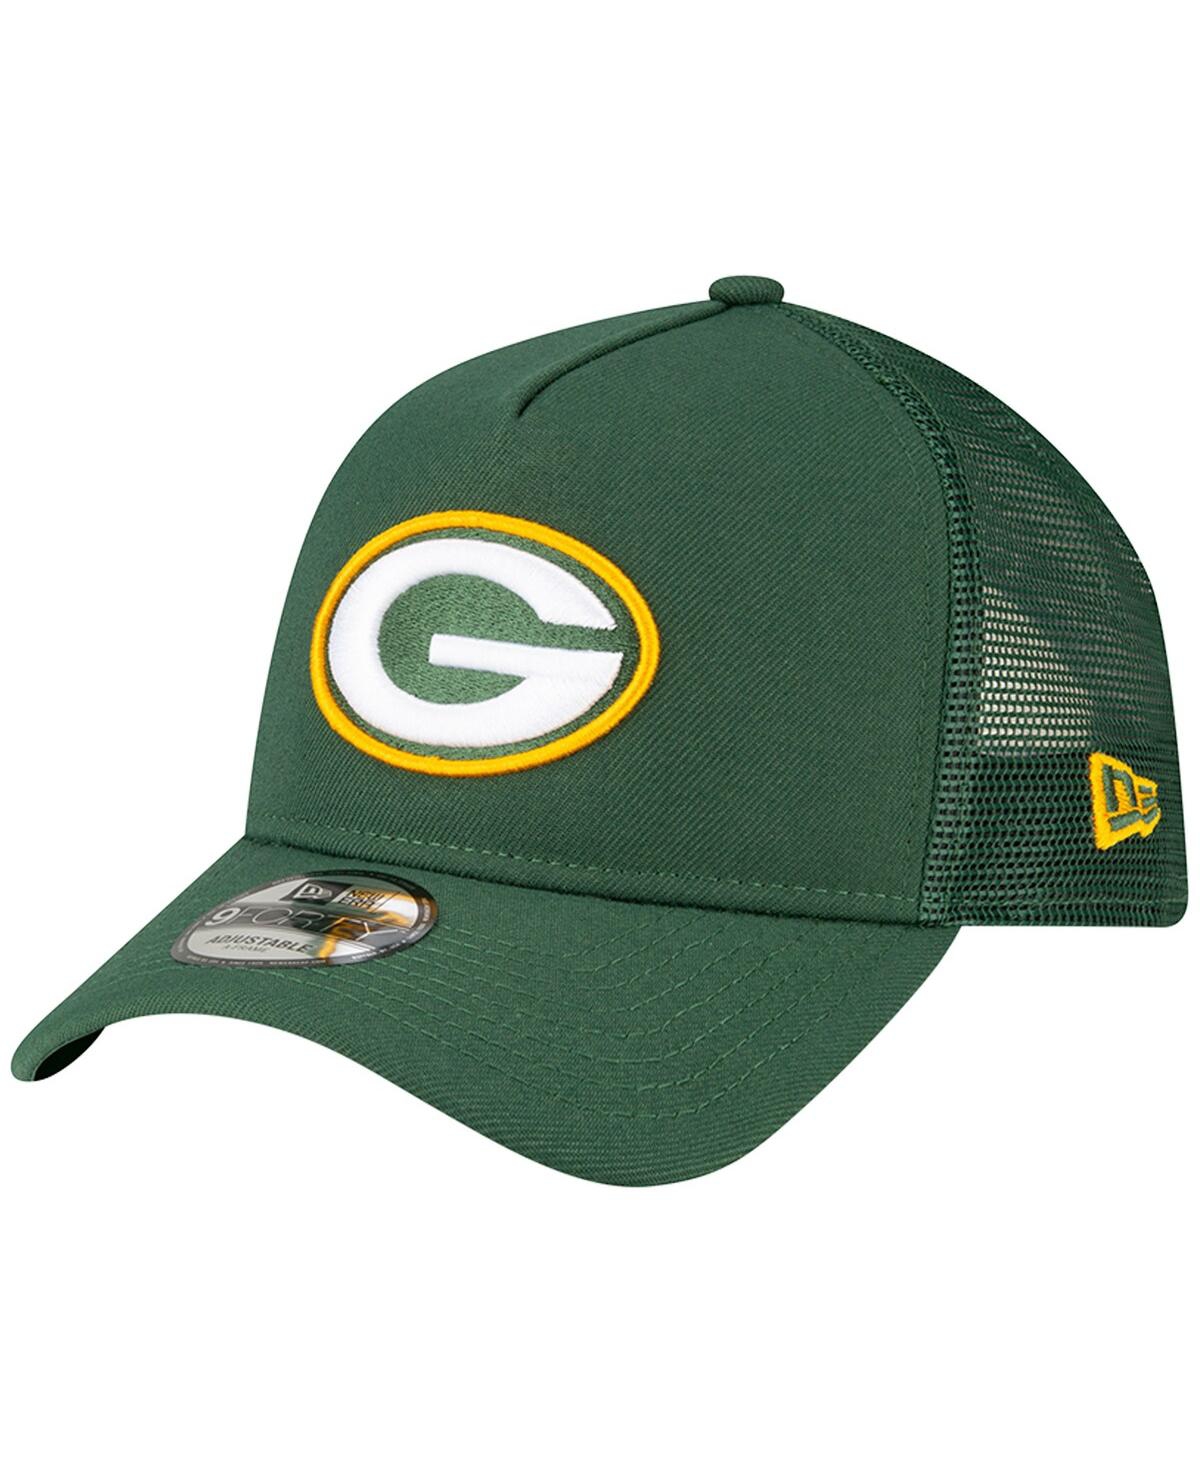 New Era Men's  Green Green Bay Packers A-frame Trucker 9forty Adjustable Hat